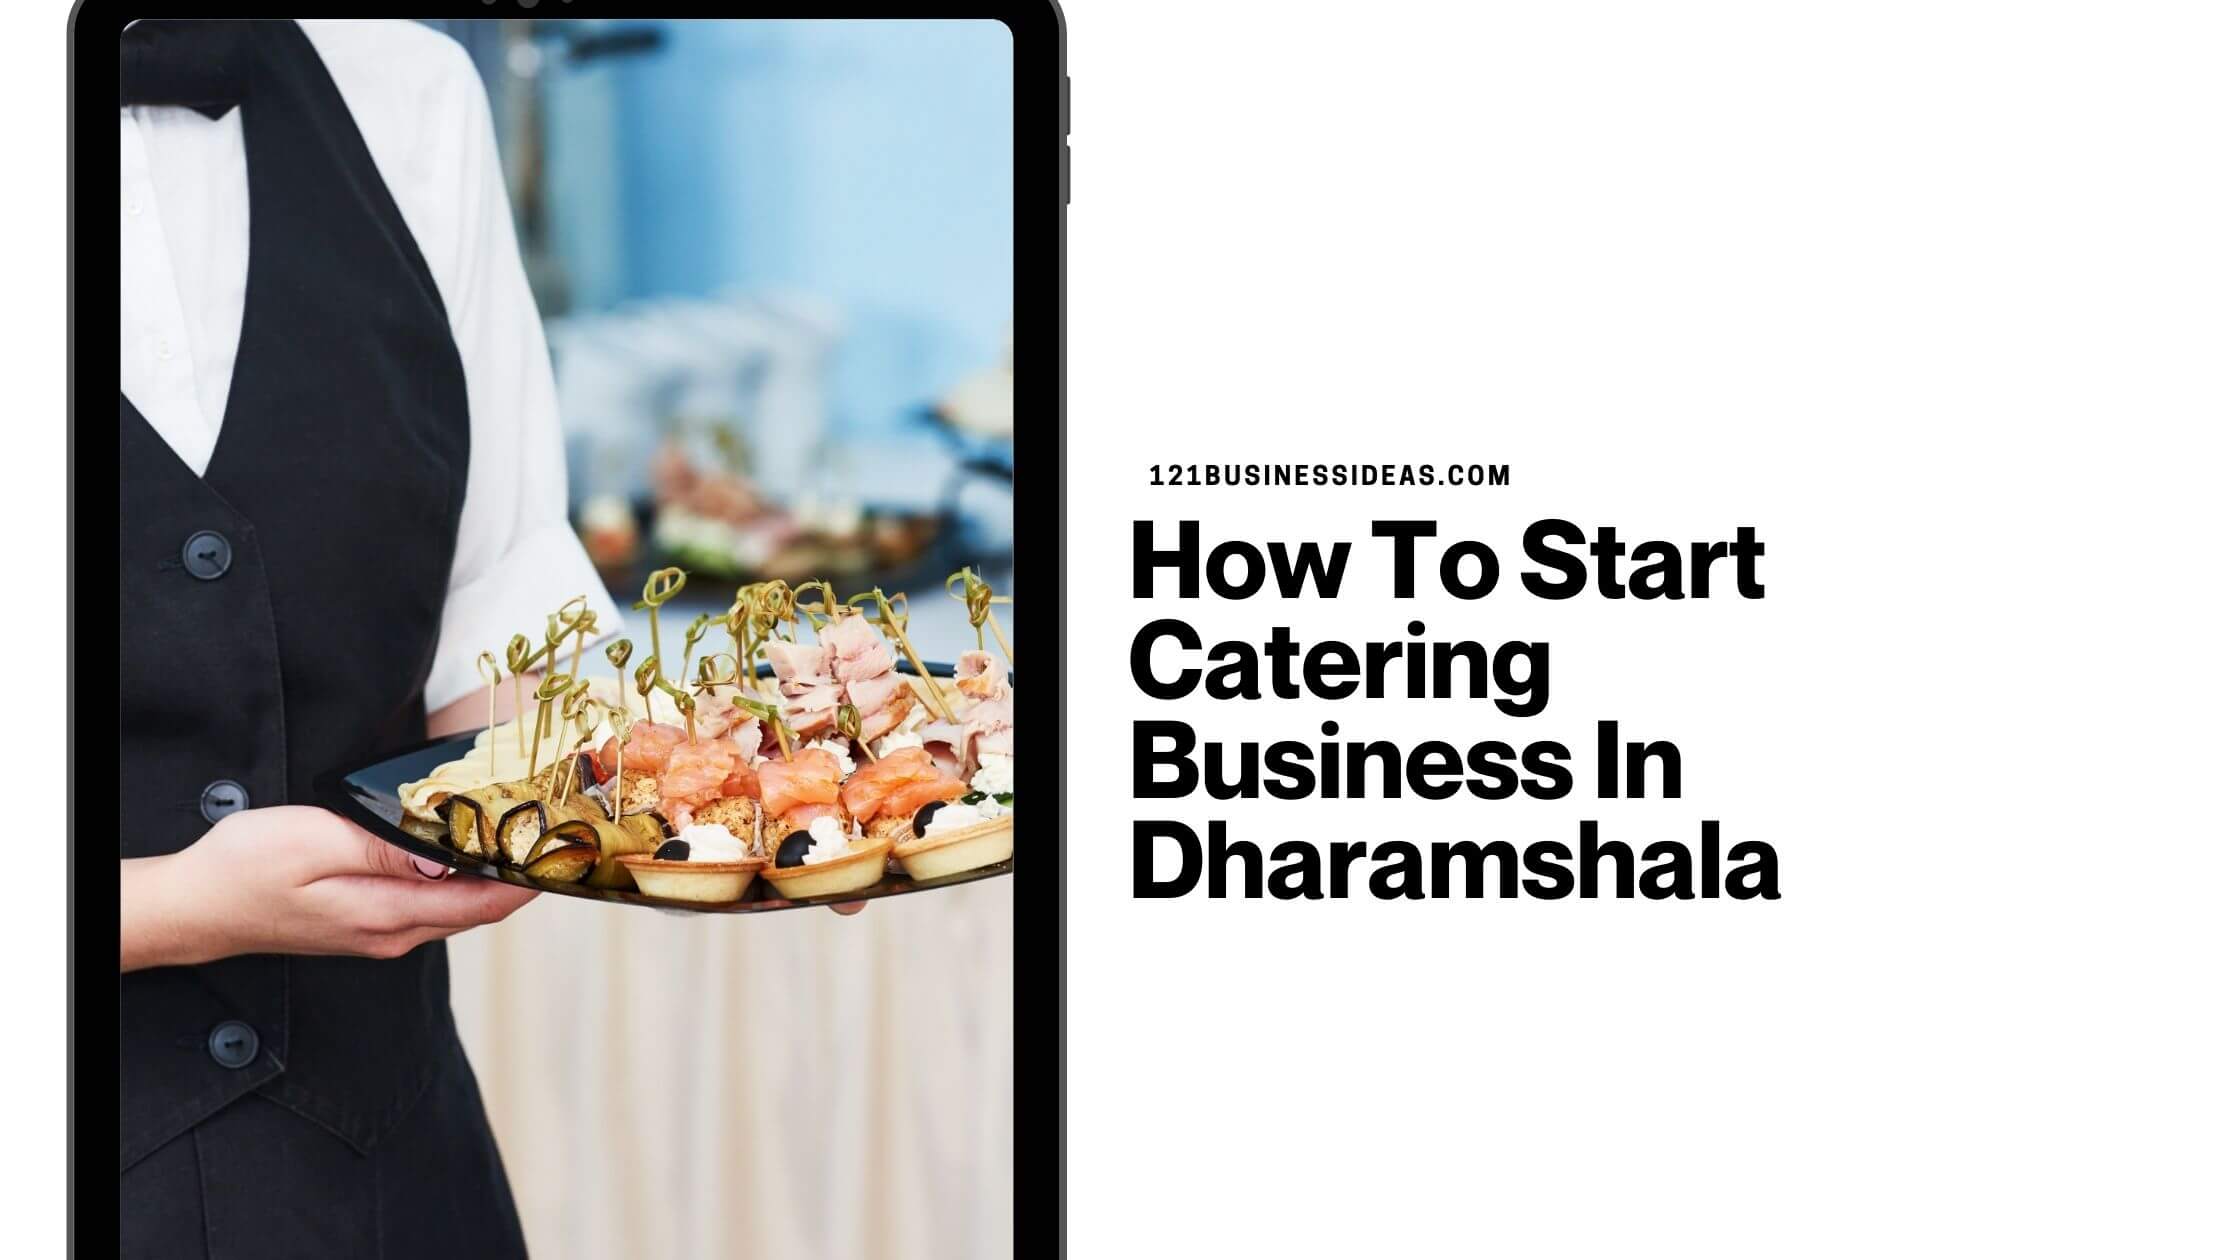 How To Start Catering Business In Dharamshala (1)